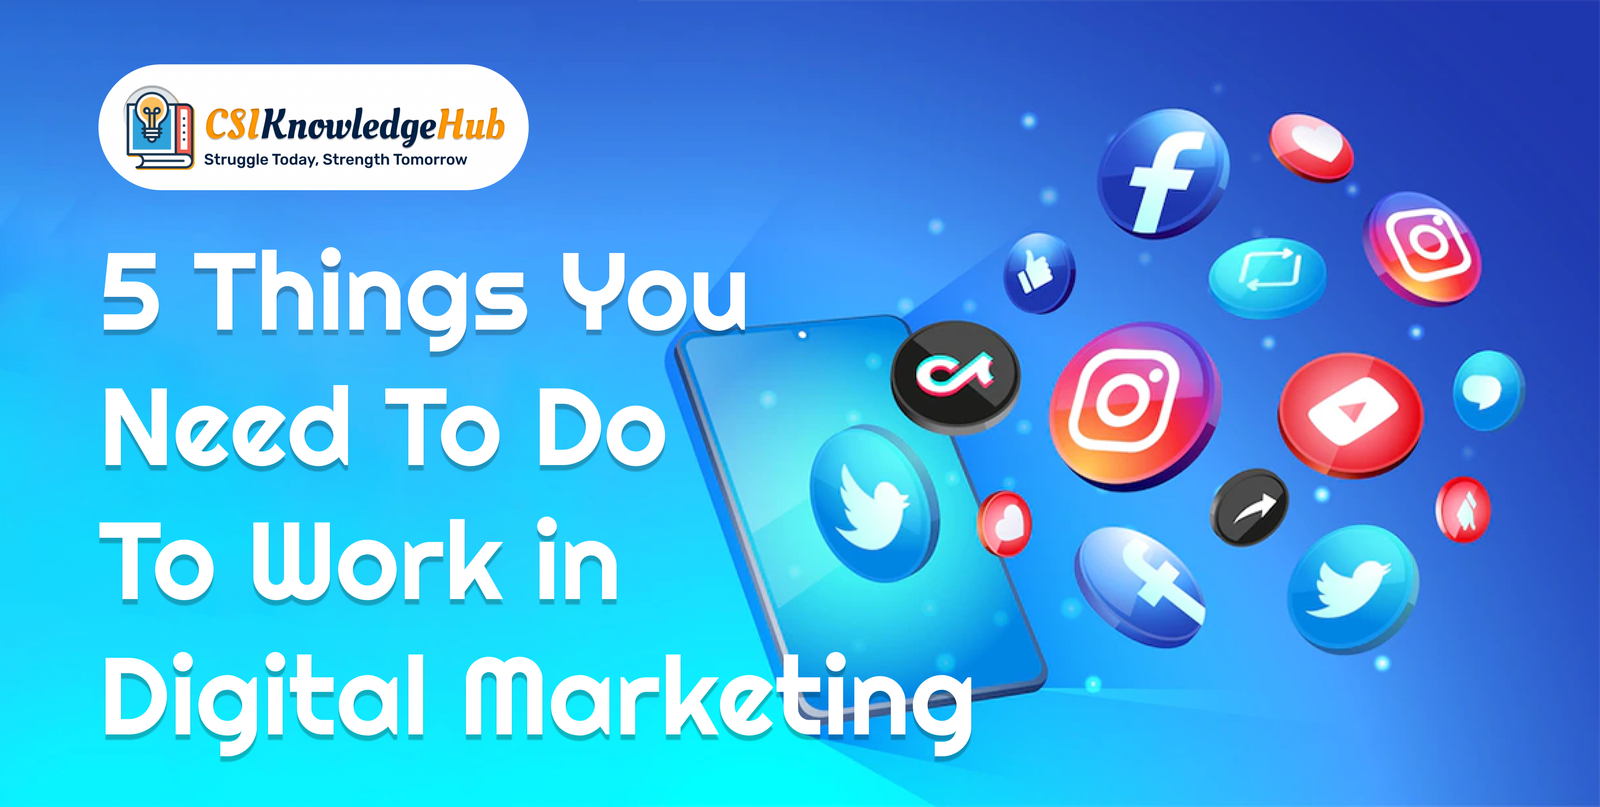 5 Things You Need To Do to Work in Digital Marketing